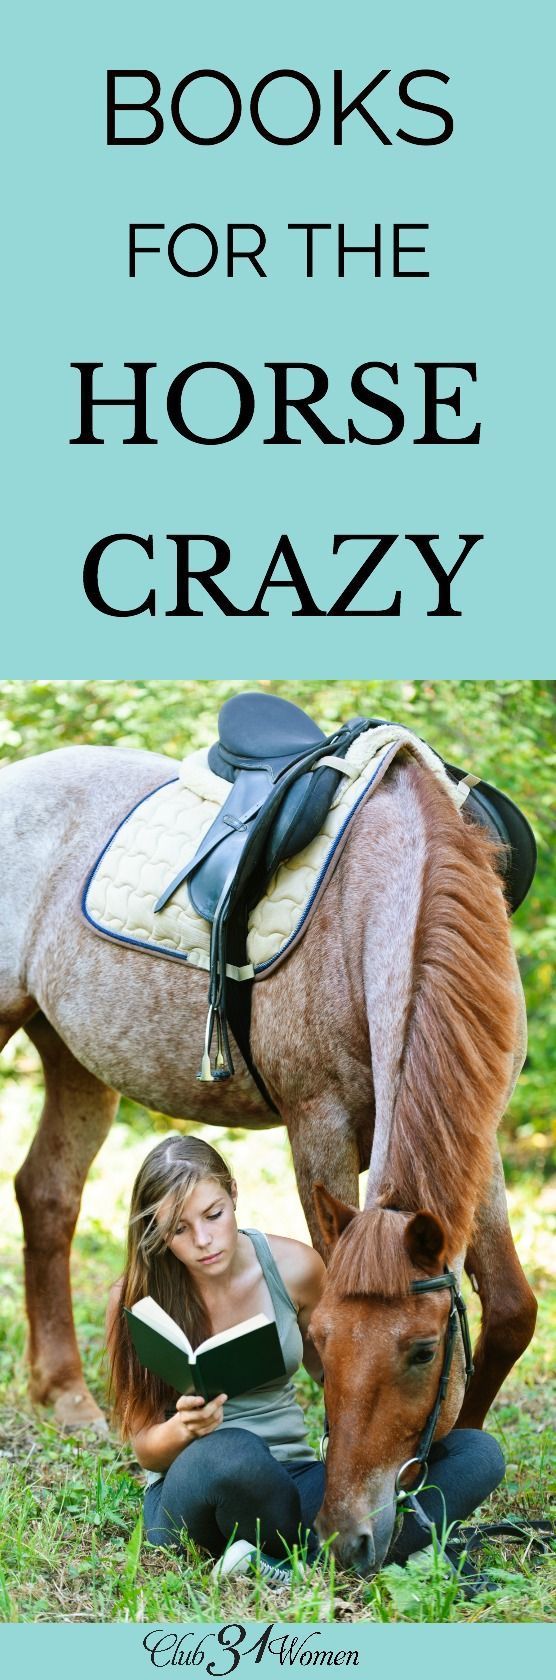 Do you have a middle school girl who loves horses and cant get enough great horse stories? Here is a list of amazing horse stories